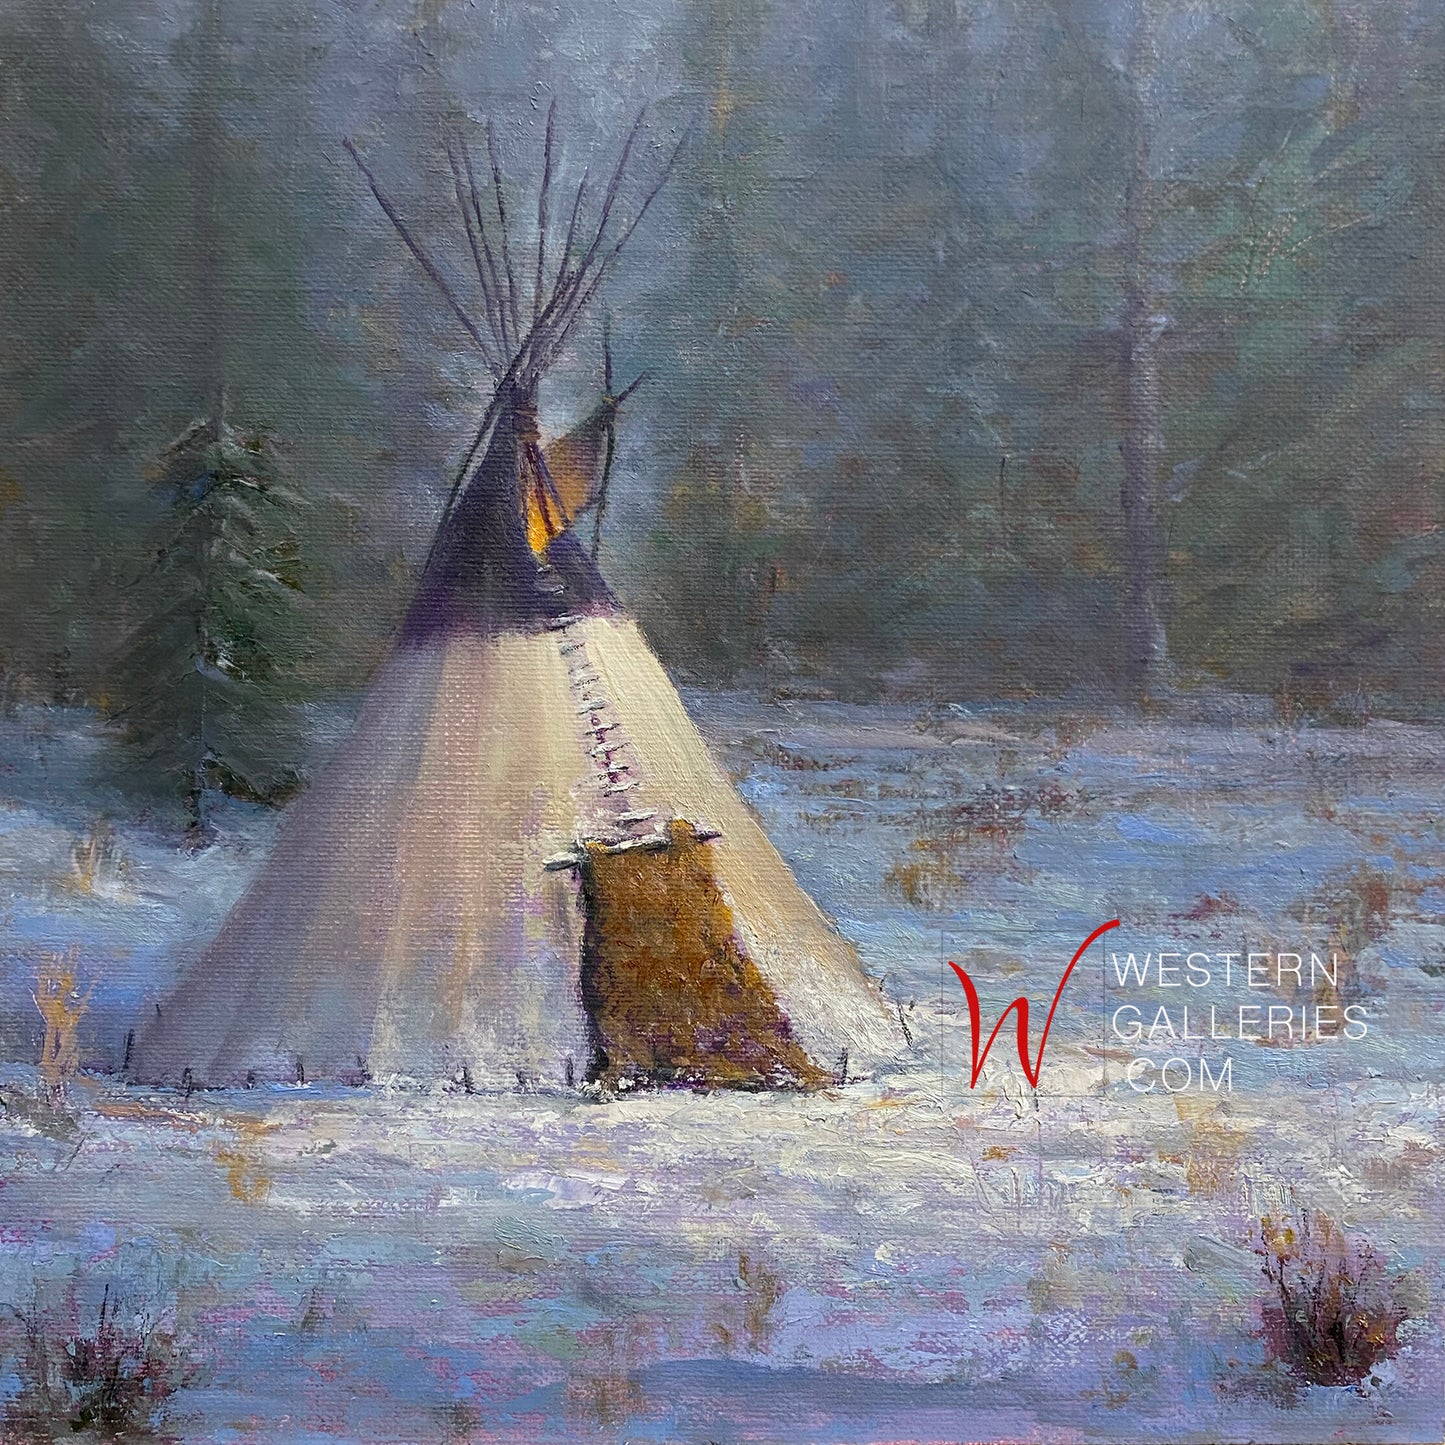 10x10 Original Oil Painting Native American Tipi Teepee in Woods Snow Winter Western Art by Artist Kathy Weigand | Western Galleries 